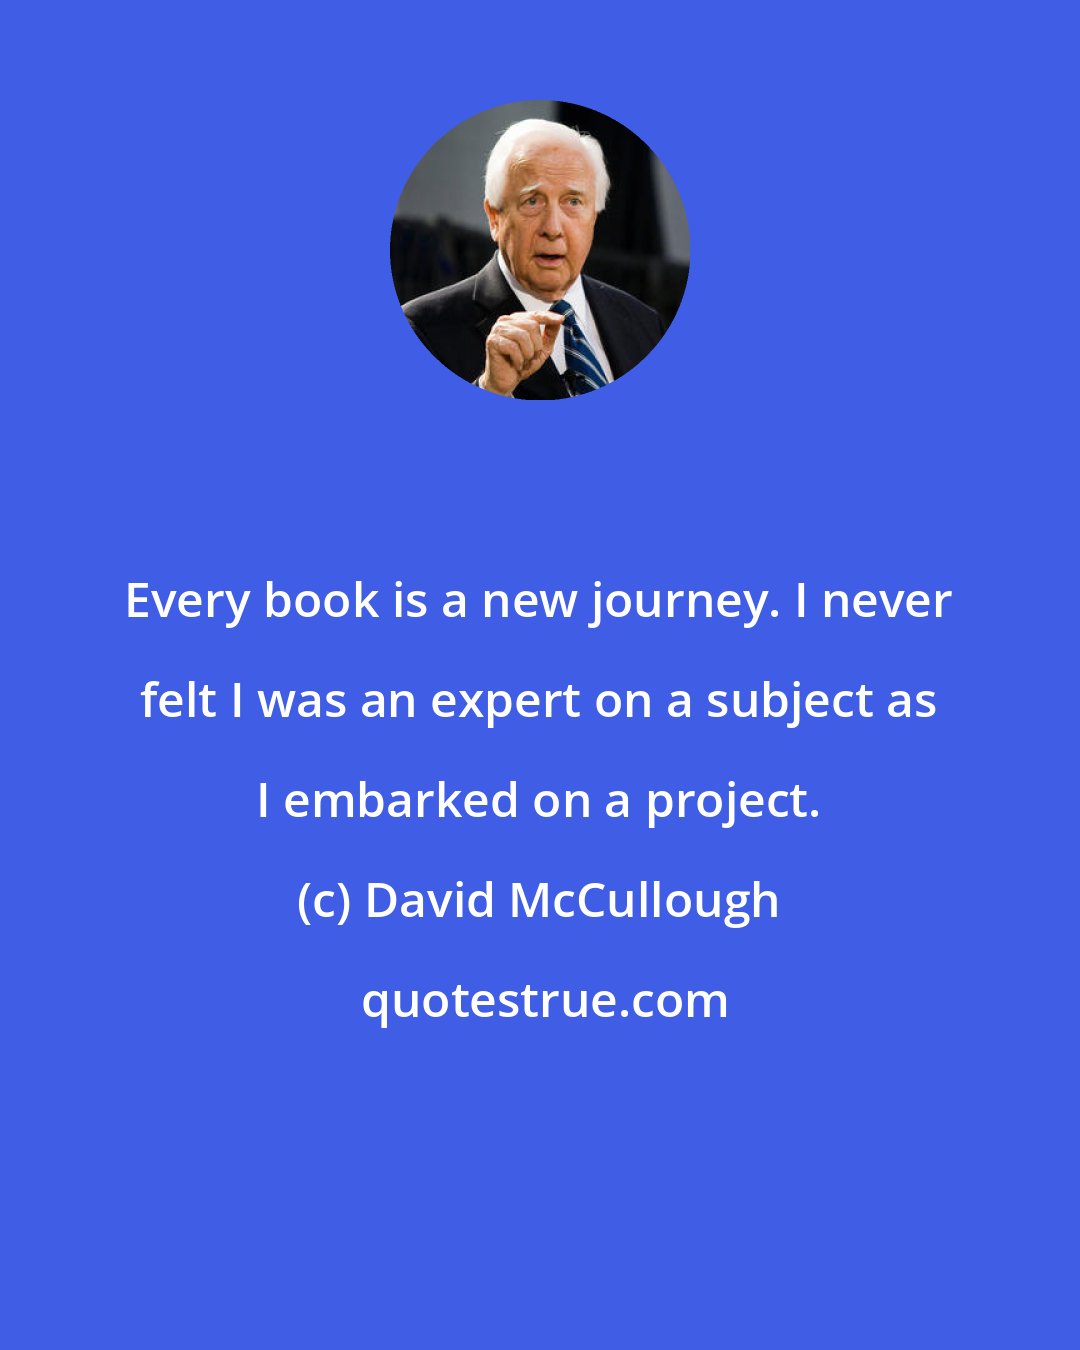 David McCullough: Every book is a new journey. I never felt I was an expert on a subject as I embarked on a project.